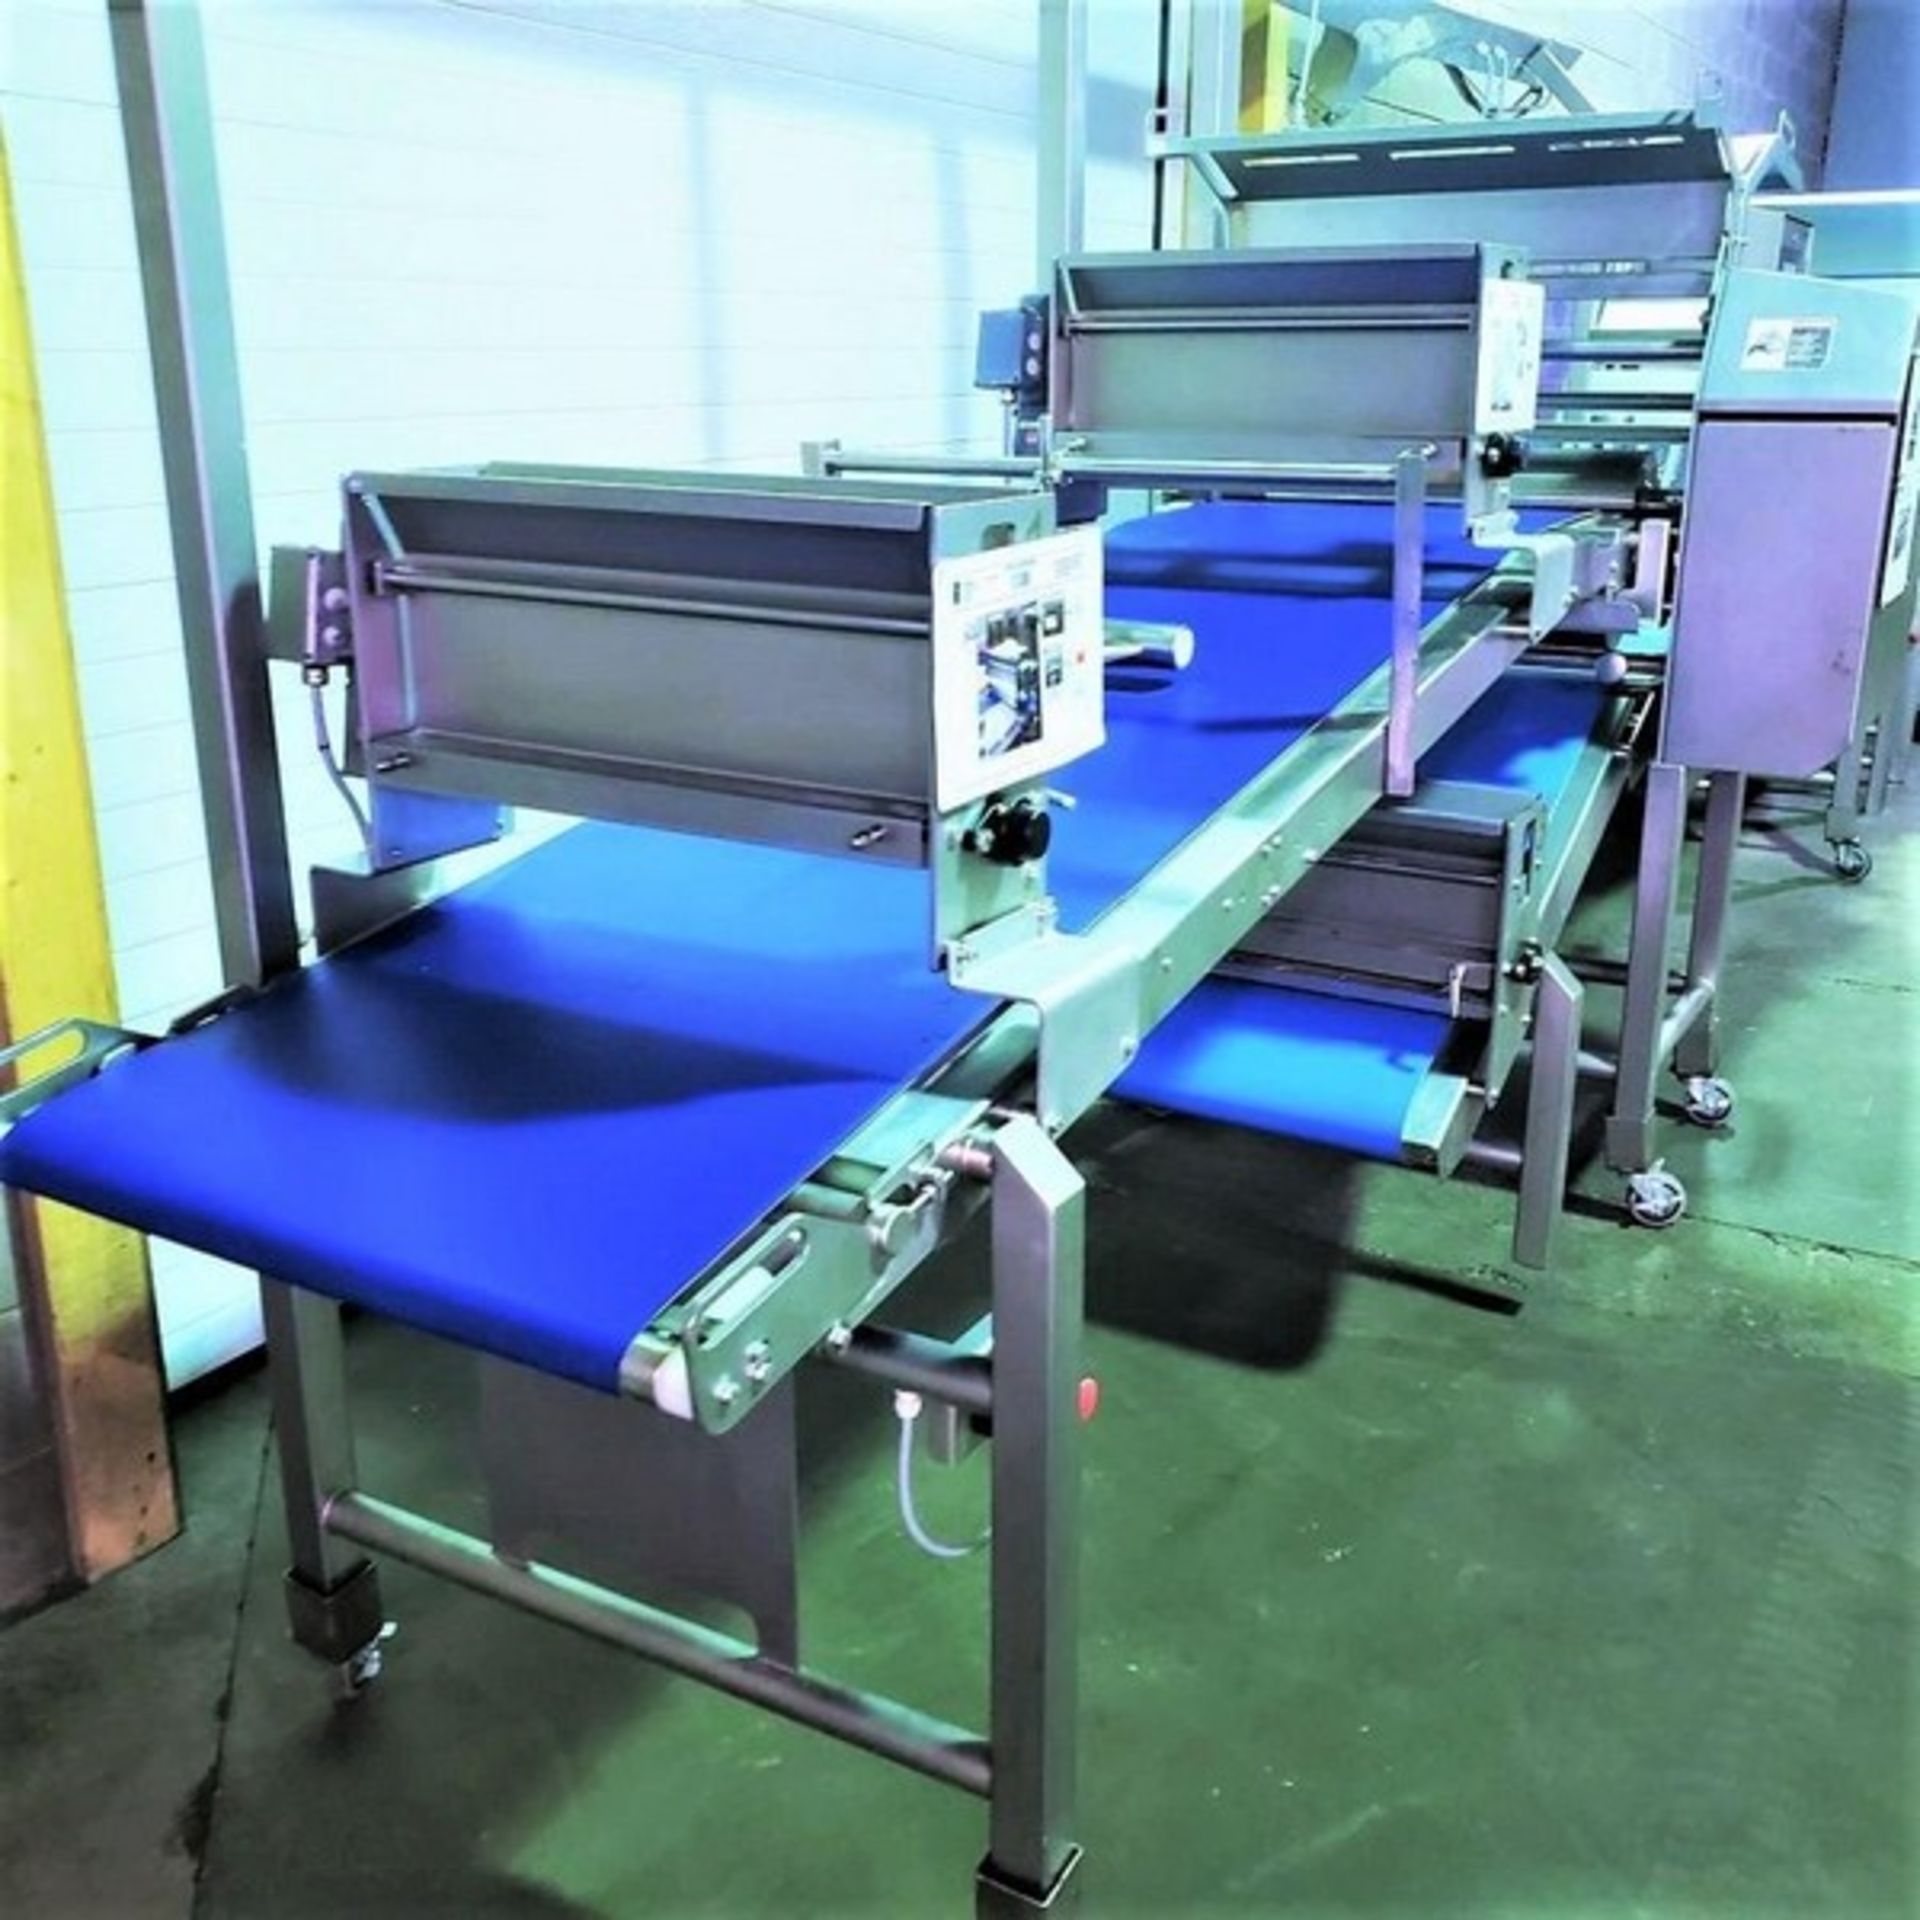 Tromp Bakery Line multi-purpose S/S Combines Dough and Flour Depositin, With Roller Sheeting, Fold - Image 7 of 11